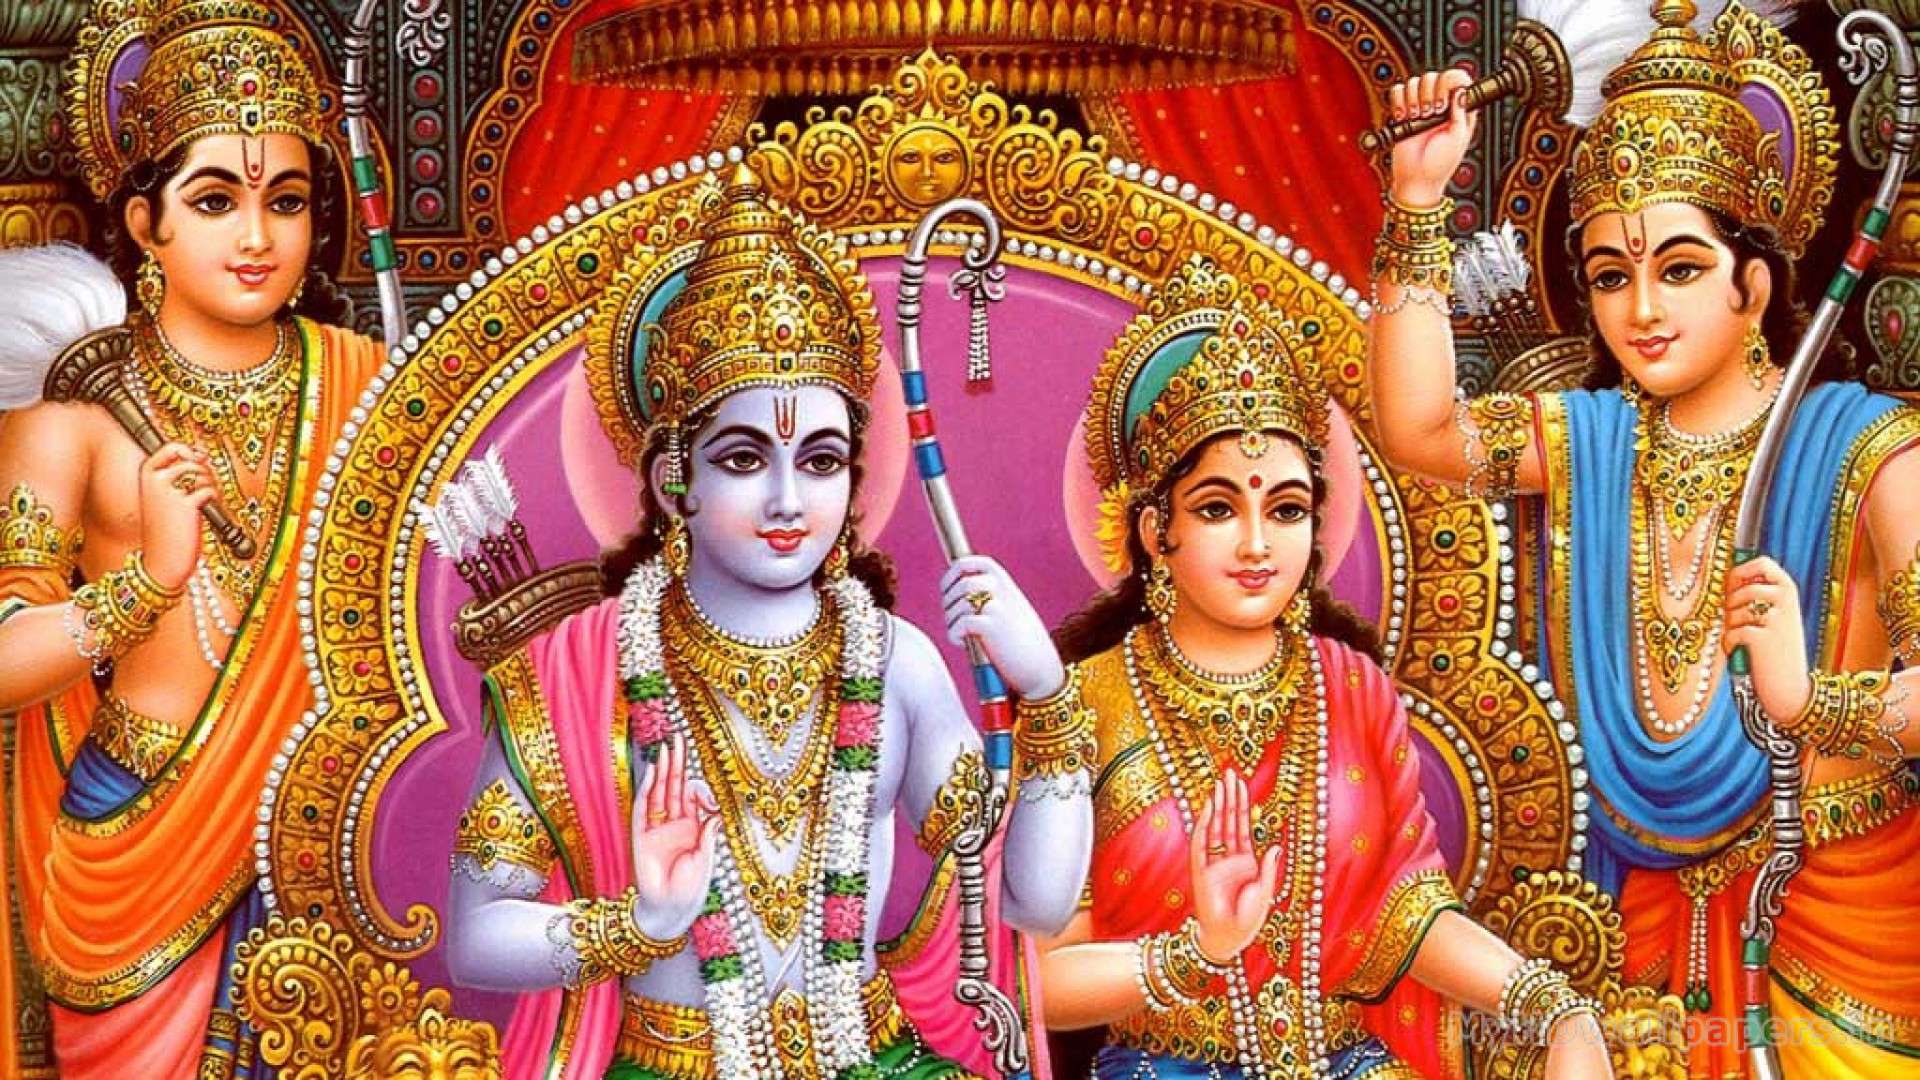 lord rama wallpapers high resolution,marriage,tradition,temple,place of worship,temple